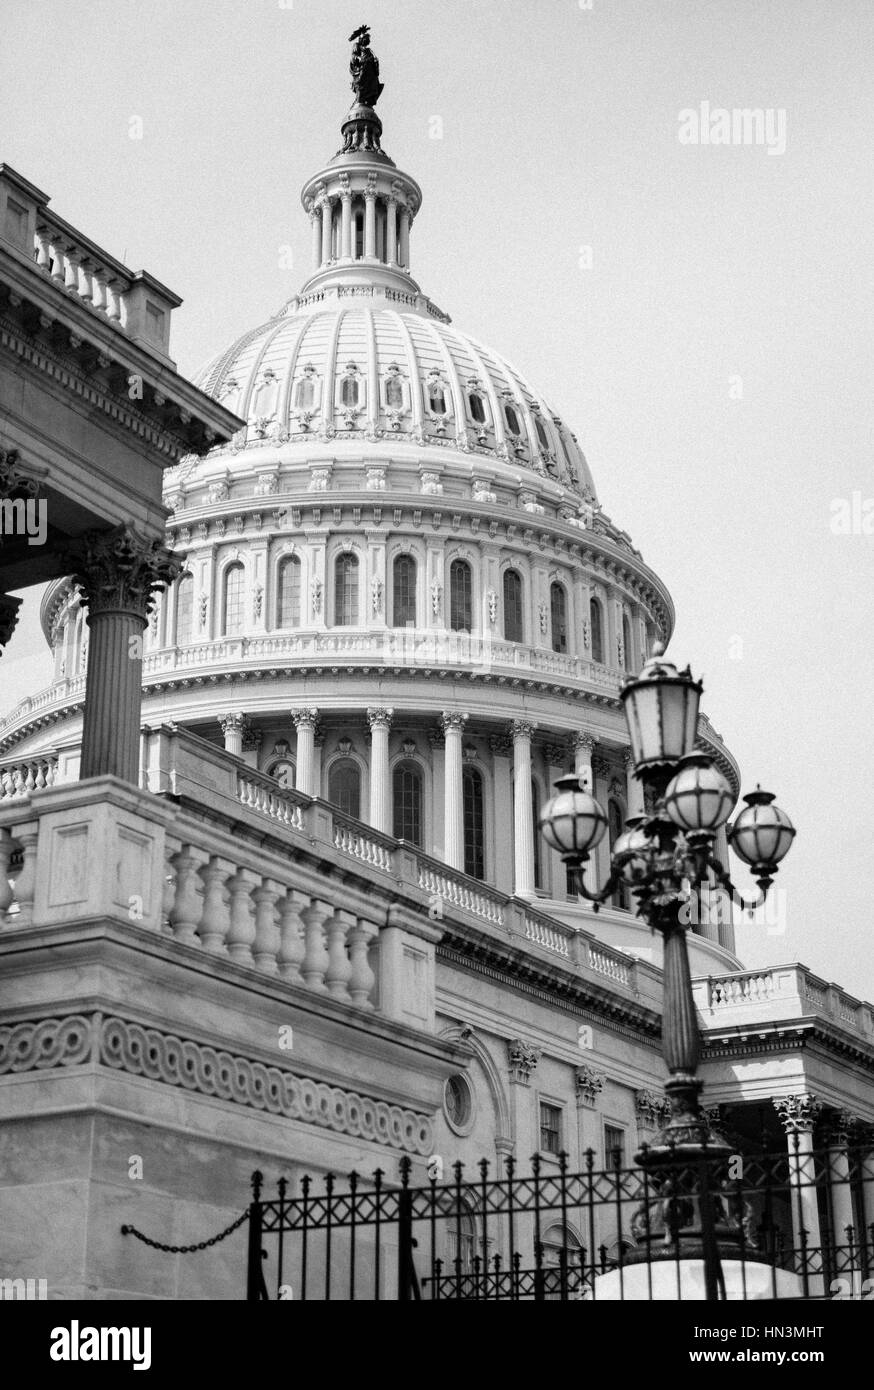 Black and white image of the United States Capitol Building in Washington, District of Columbia. Stock Photo